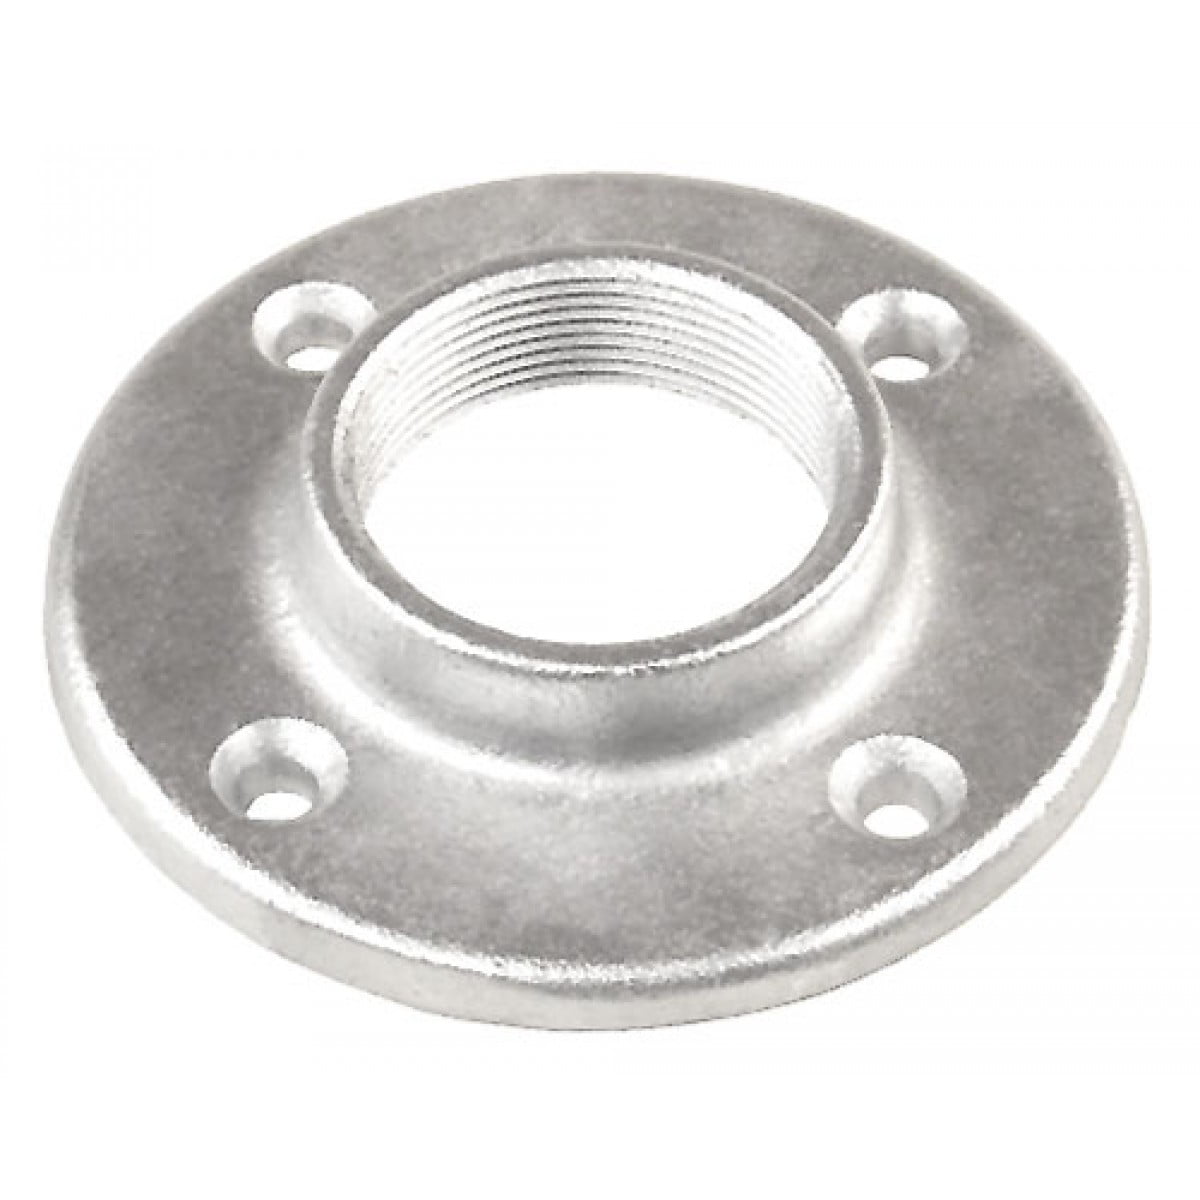 .0625 Crs Galvanized 1 In 10 Pcs Screw/Bar Type Knockout Seal For Standard Air Tight Or Dust Tight Applications Steel